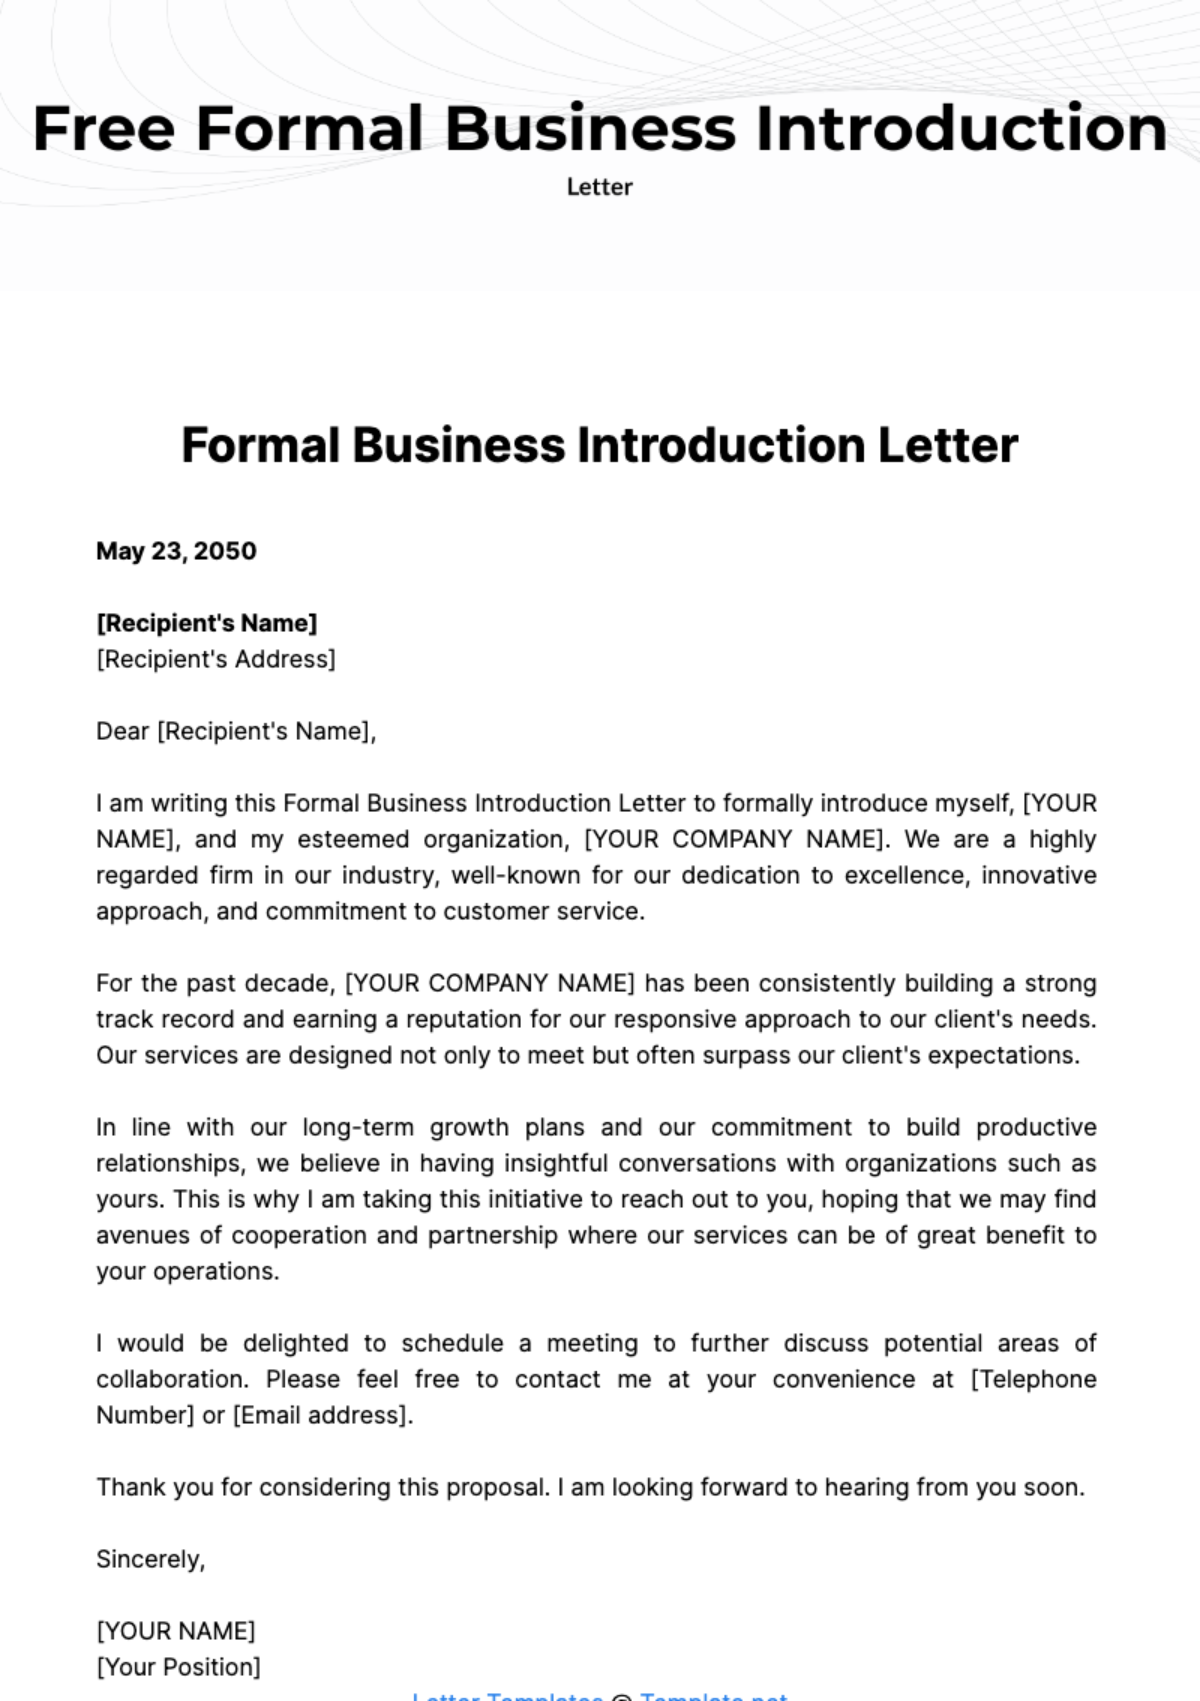 Free Formal Business Introduction Letter Template